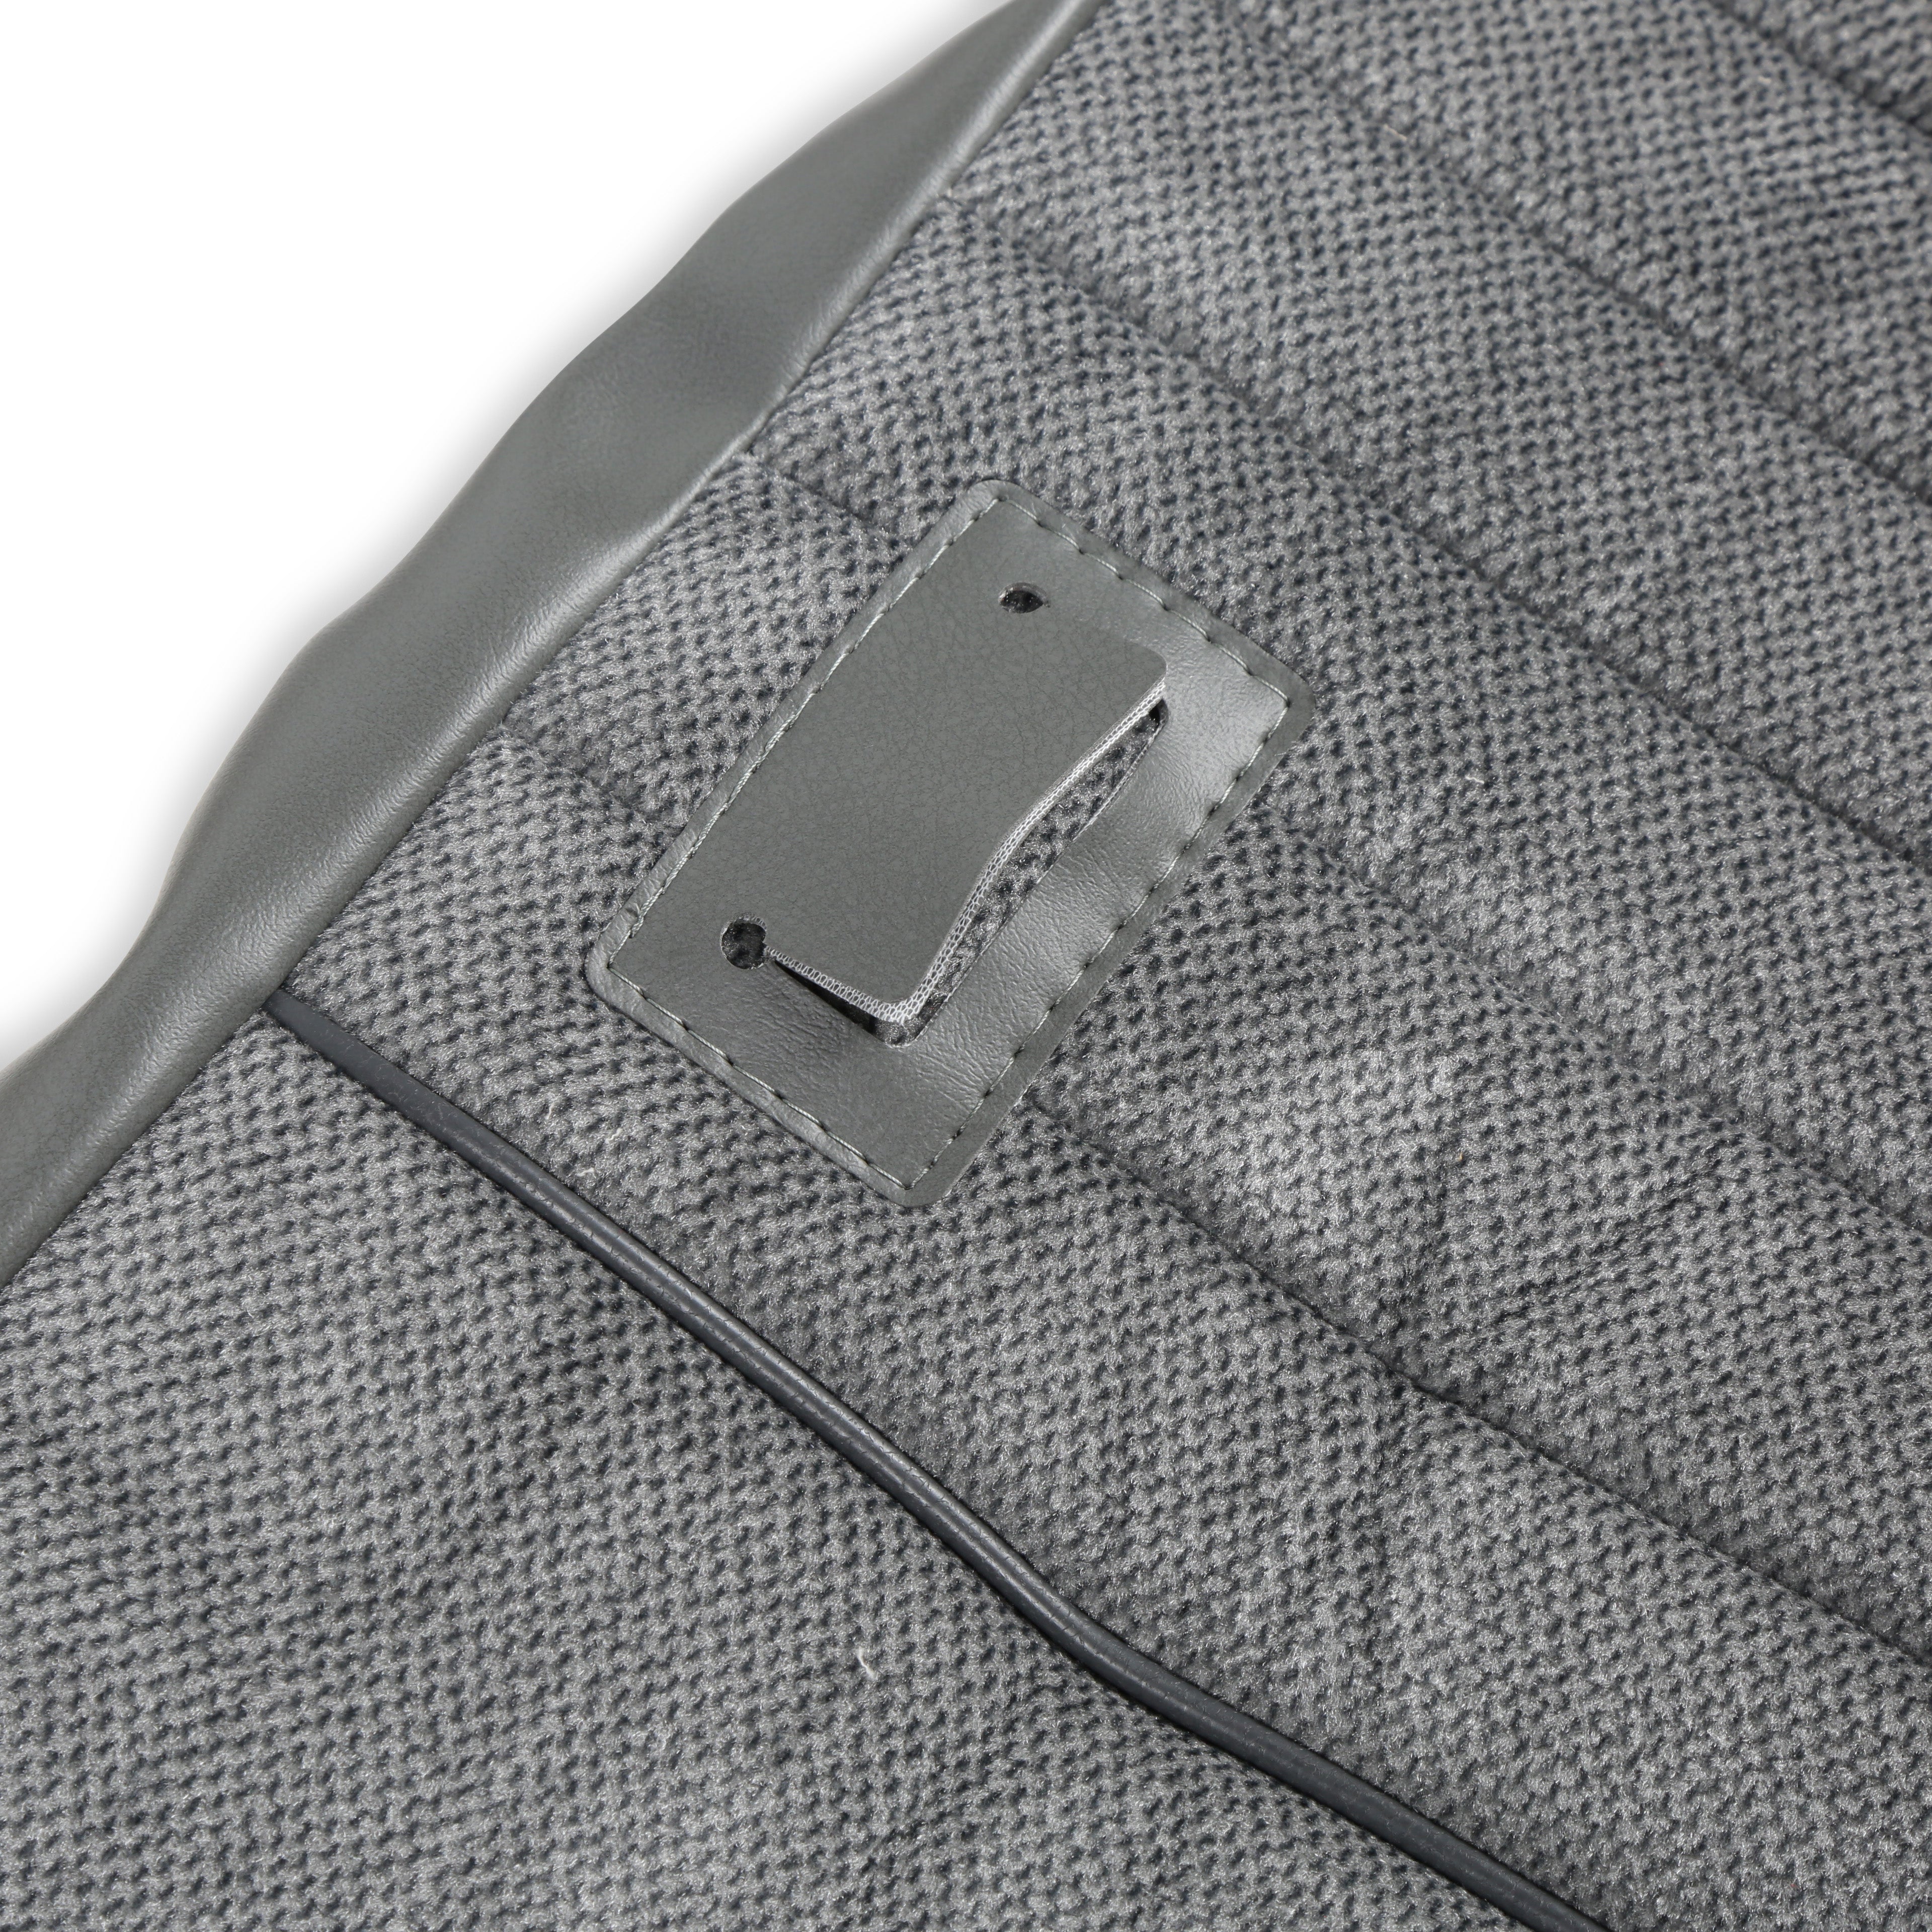 BROTHERS C/K Seat Upholstery Kit - Deluxe Pleat Cloth/Vinyl - Grey/Charcoal pn 05-324